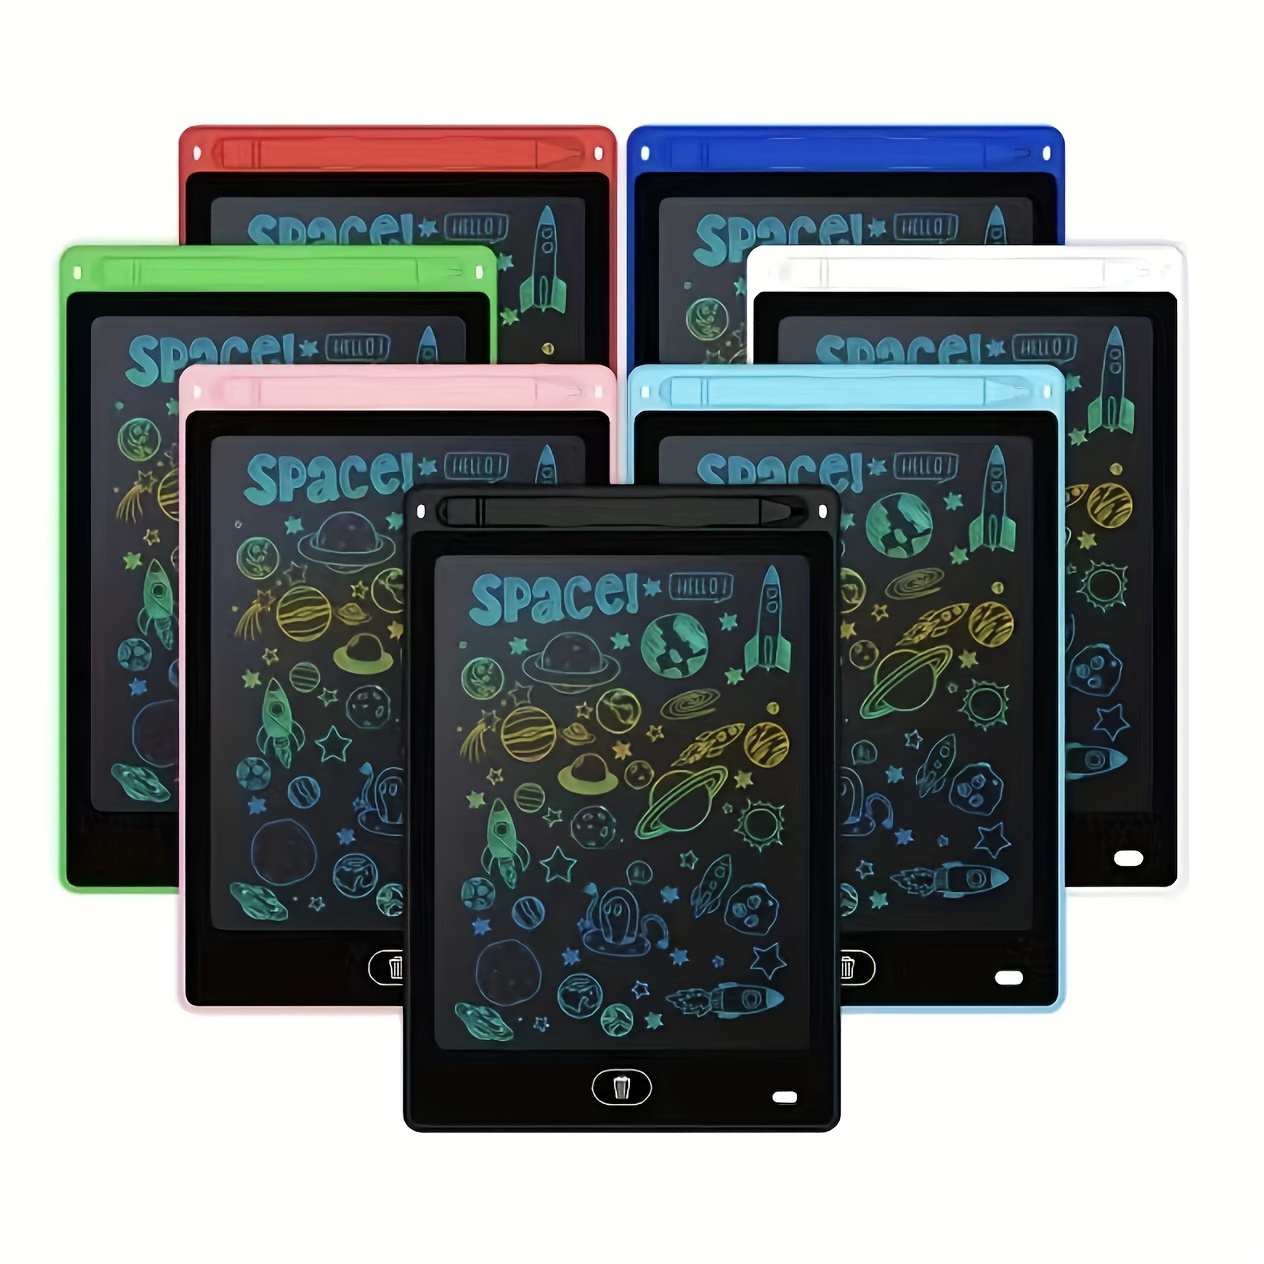 Colorful LCD Writing Tablet Electronic Touch Drawing Board Gift for Kids